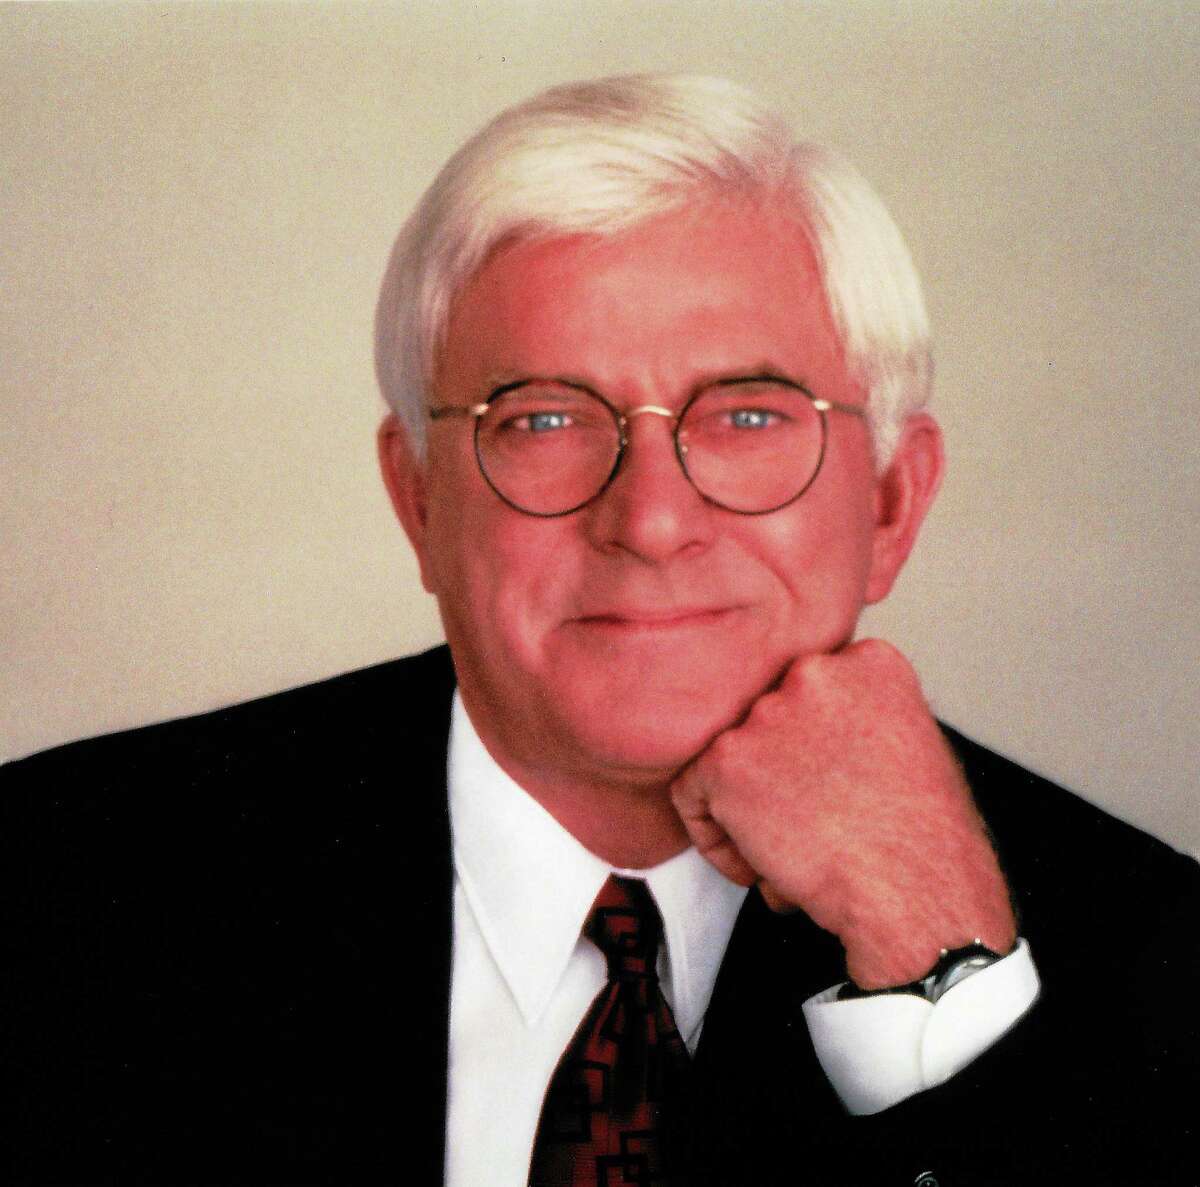 Phil Donahue to appear in New Haven to show film